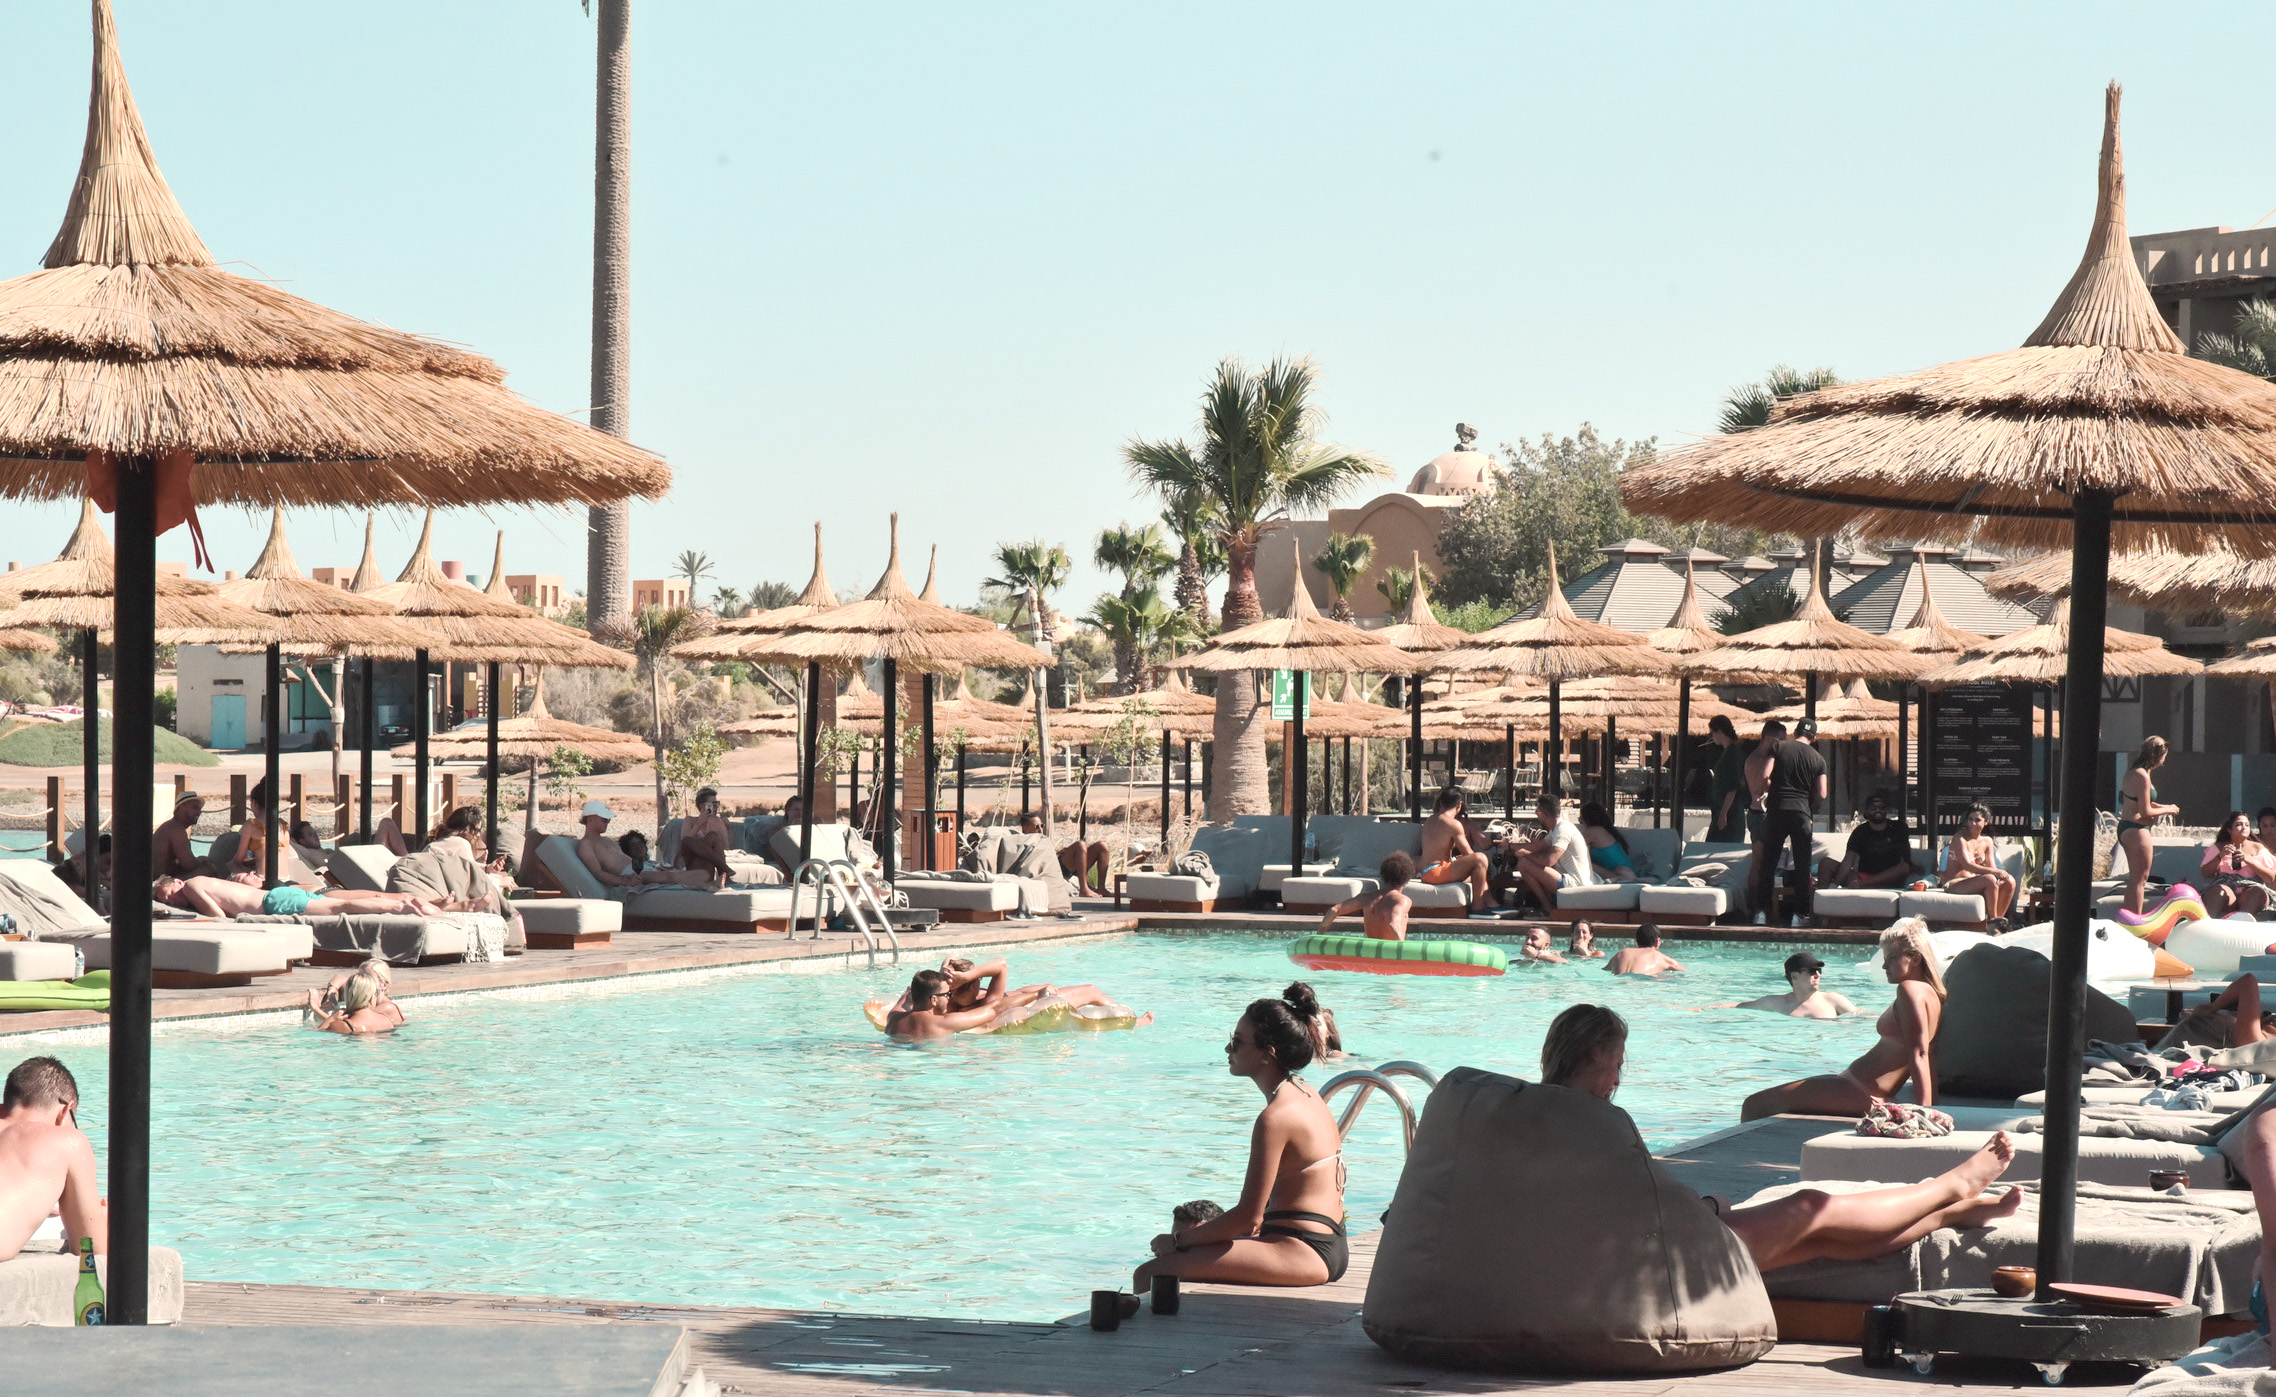 Cooks Club and Hotel: the Newest and Hippest Addition to El Gouna